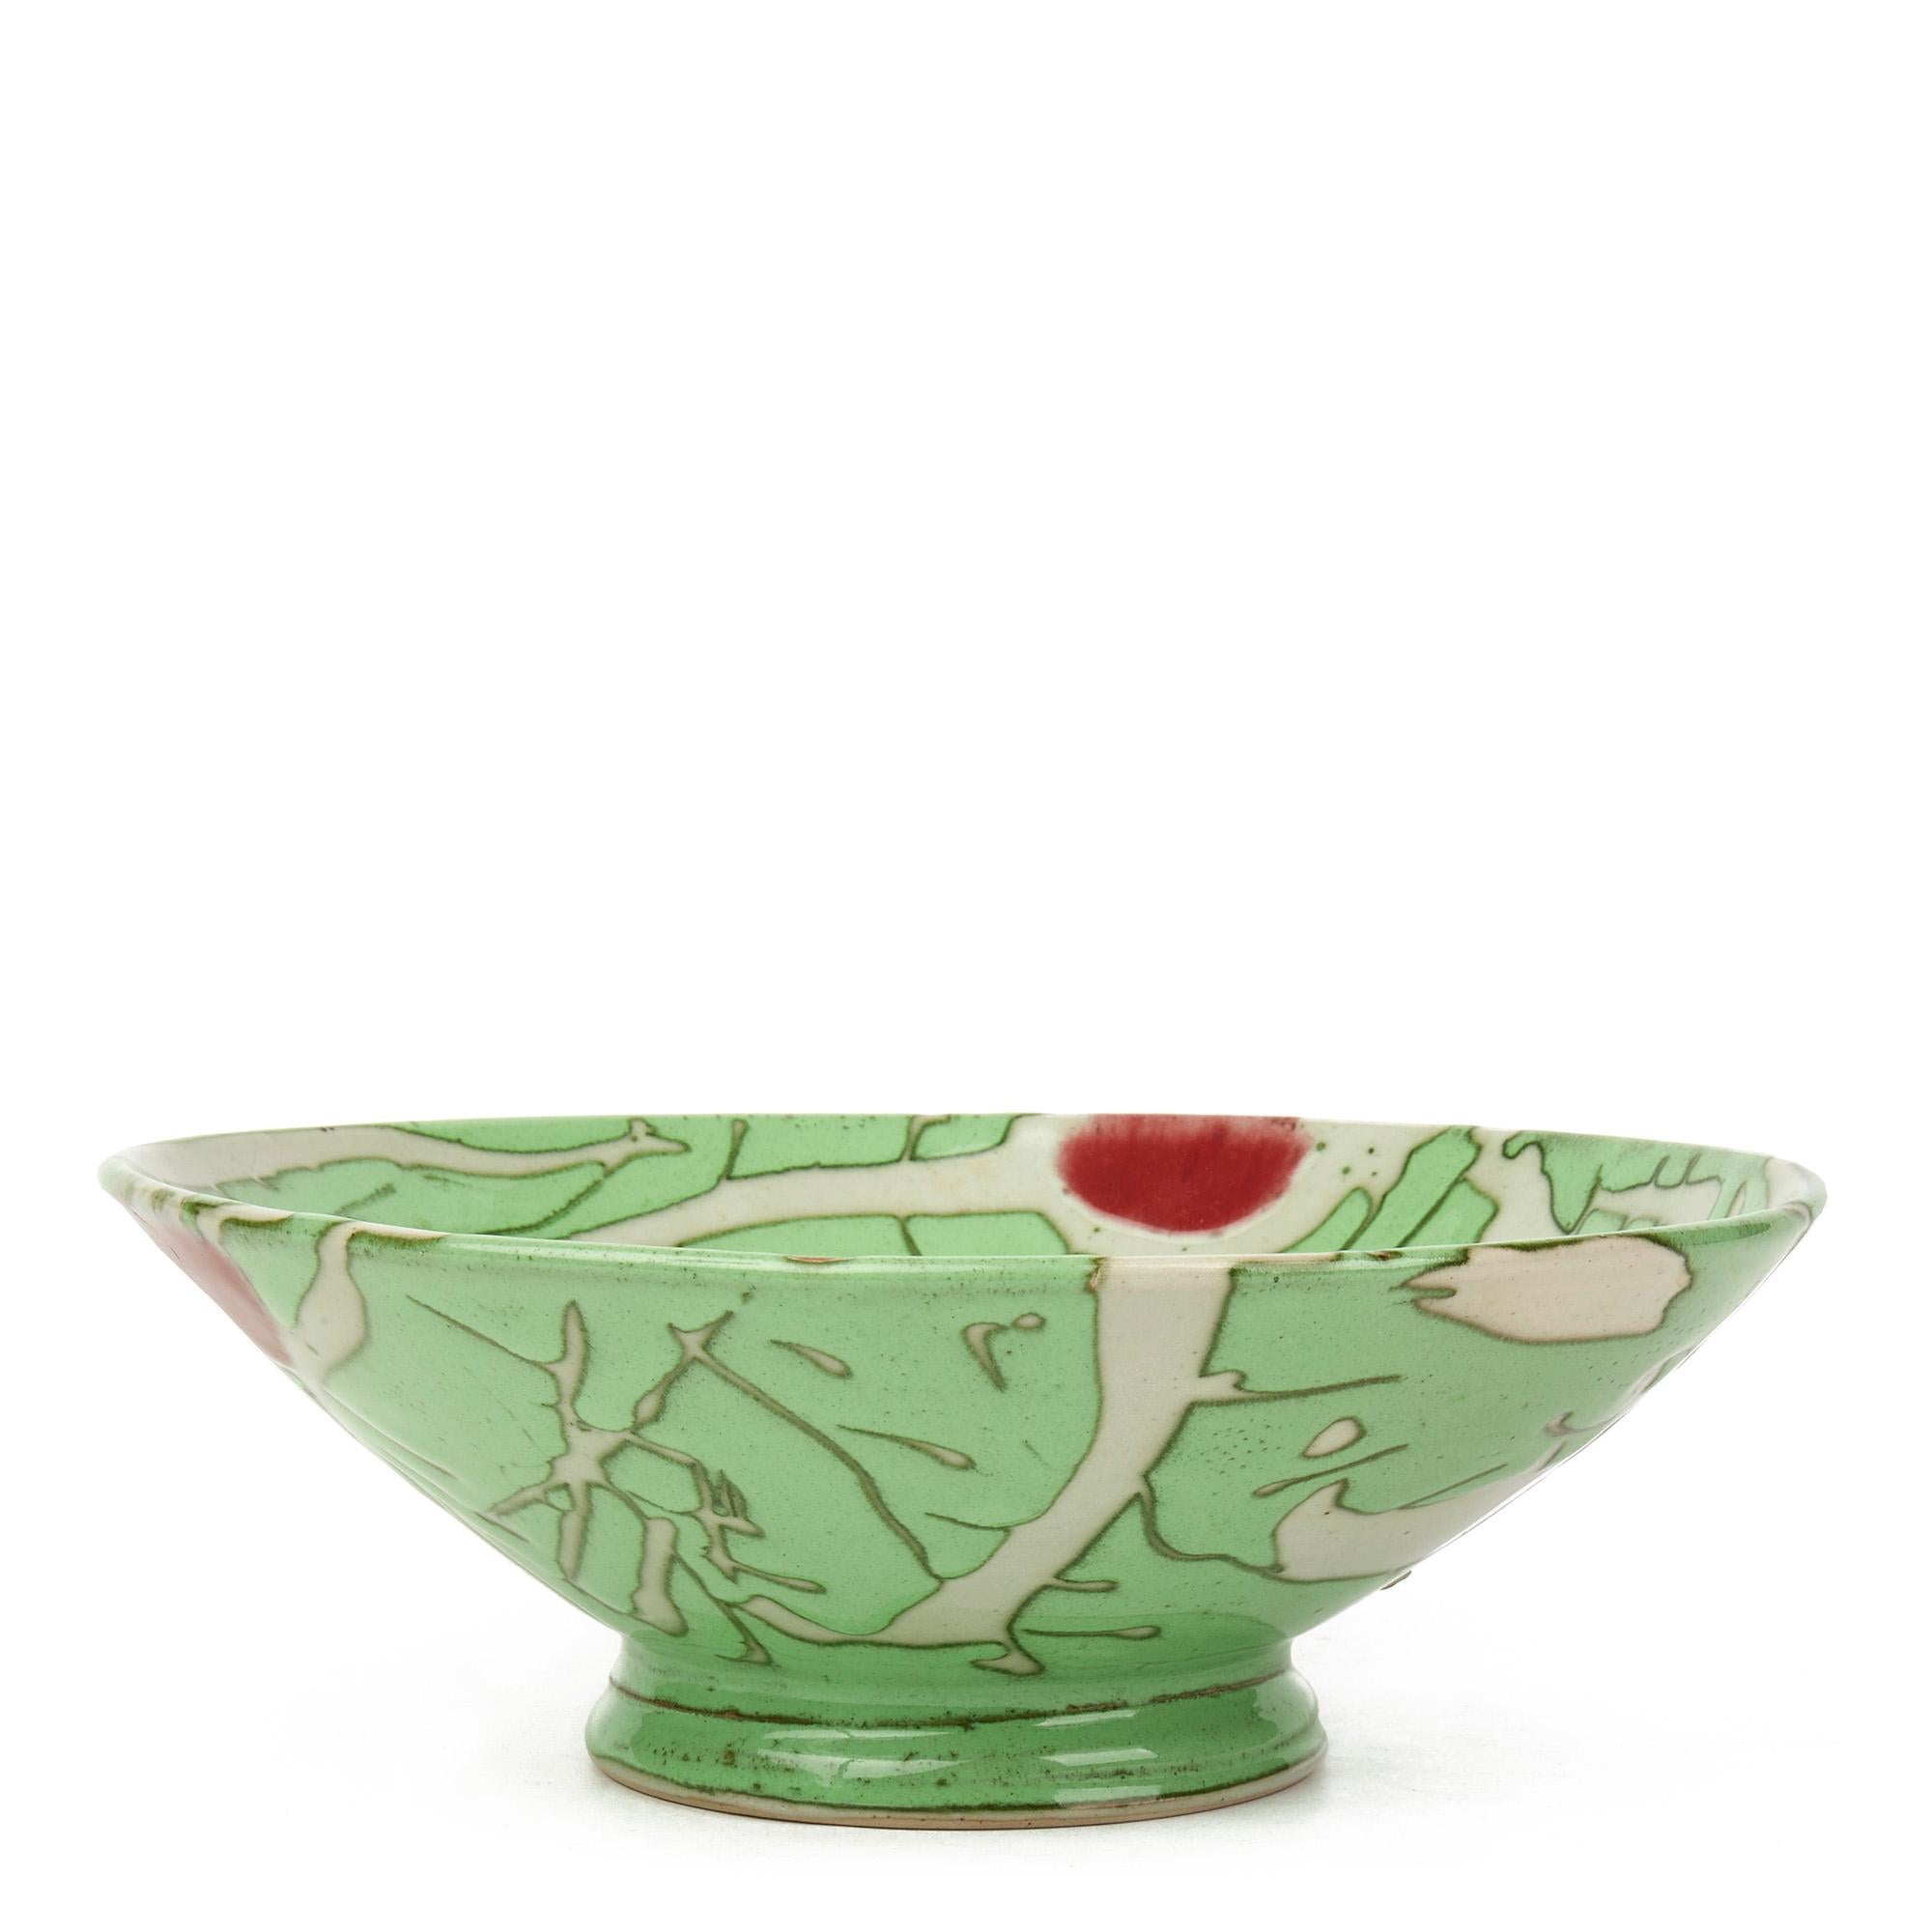 A very stylish studio pottery bowl highly and entirely hand decorated with an abstract patterned design in bright colors in green white and red with black outlines by Norfolk based potter Clive Davis. The bowl has a moulded artist mark incorporated